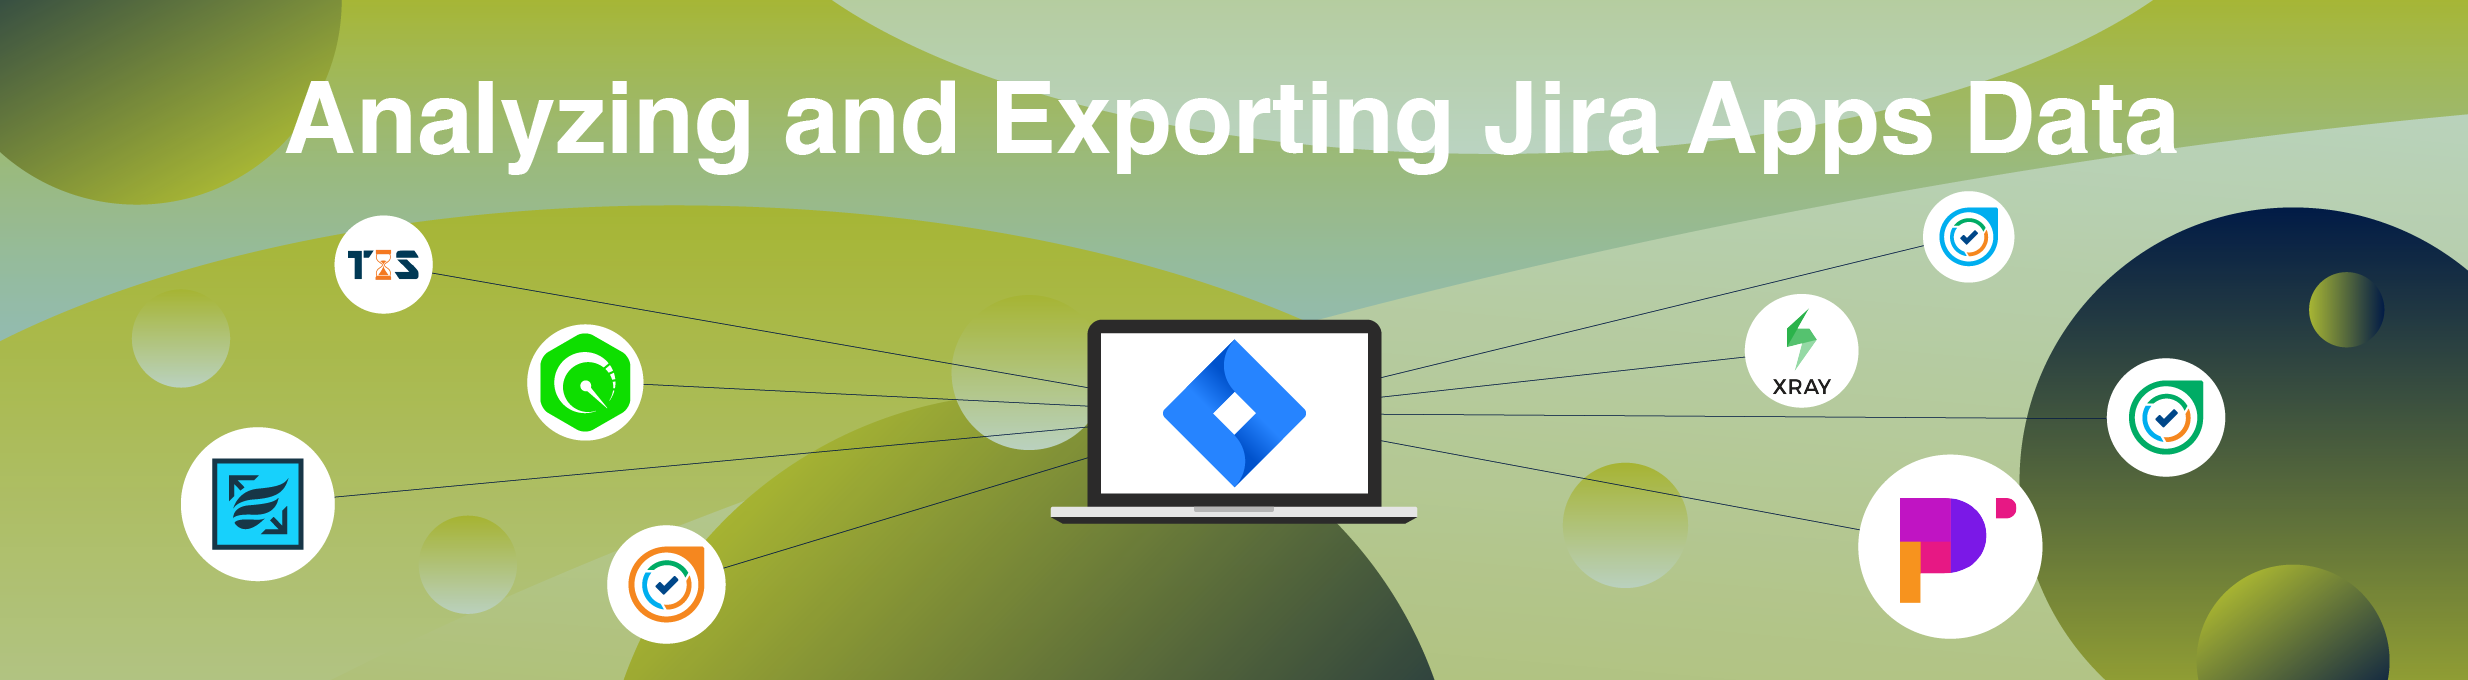 Analyzing and Exporting Data from Jira Apps made Easy - banner